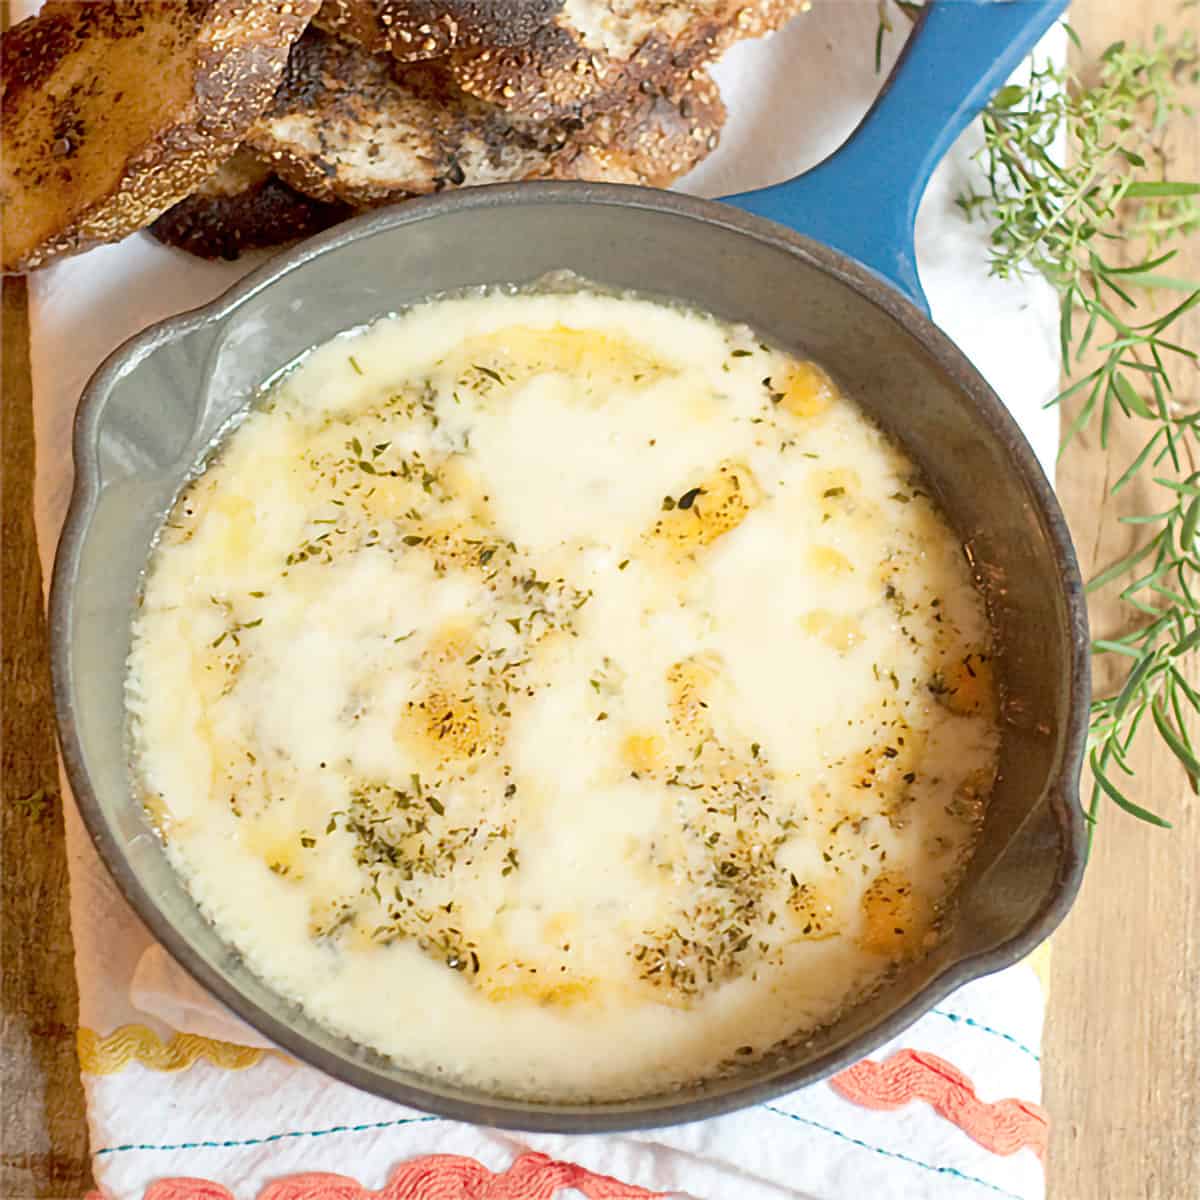 Baked fontina and herbs in a small blue skillet.